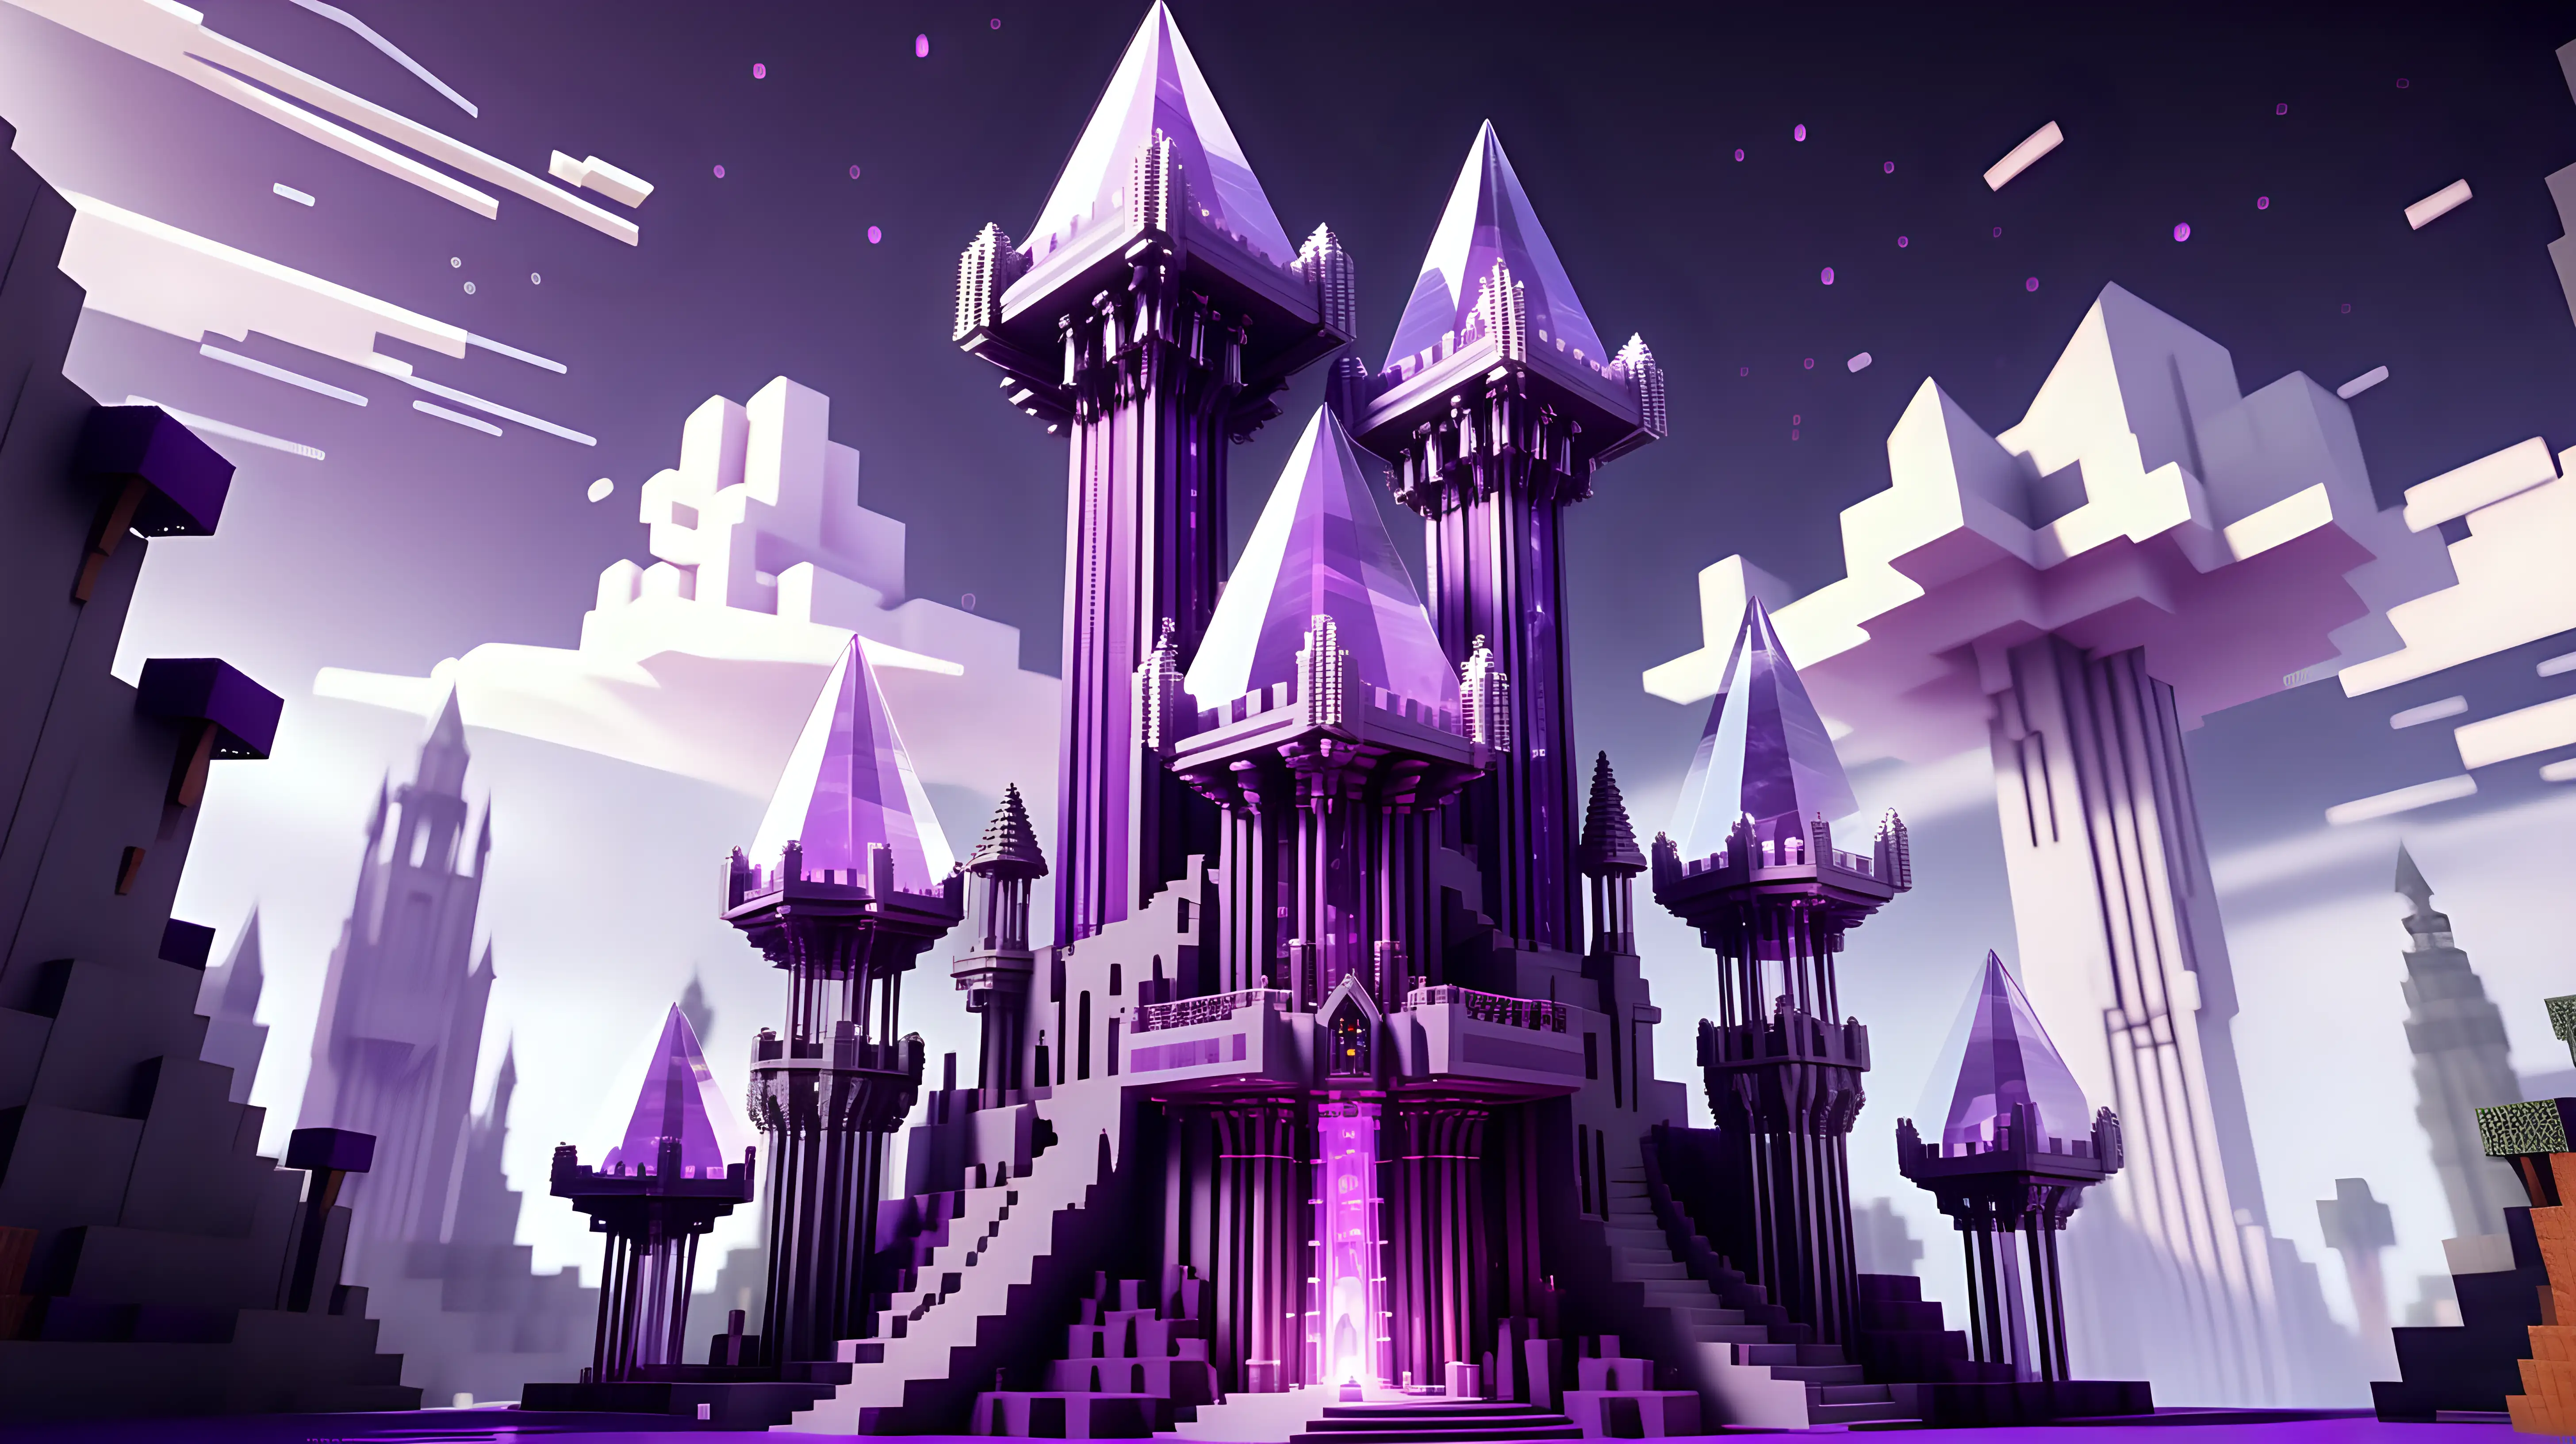 Enchanting Minecraft Style Wizard Tower with Crystal Spire Roof